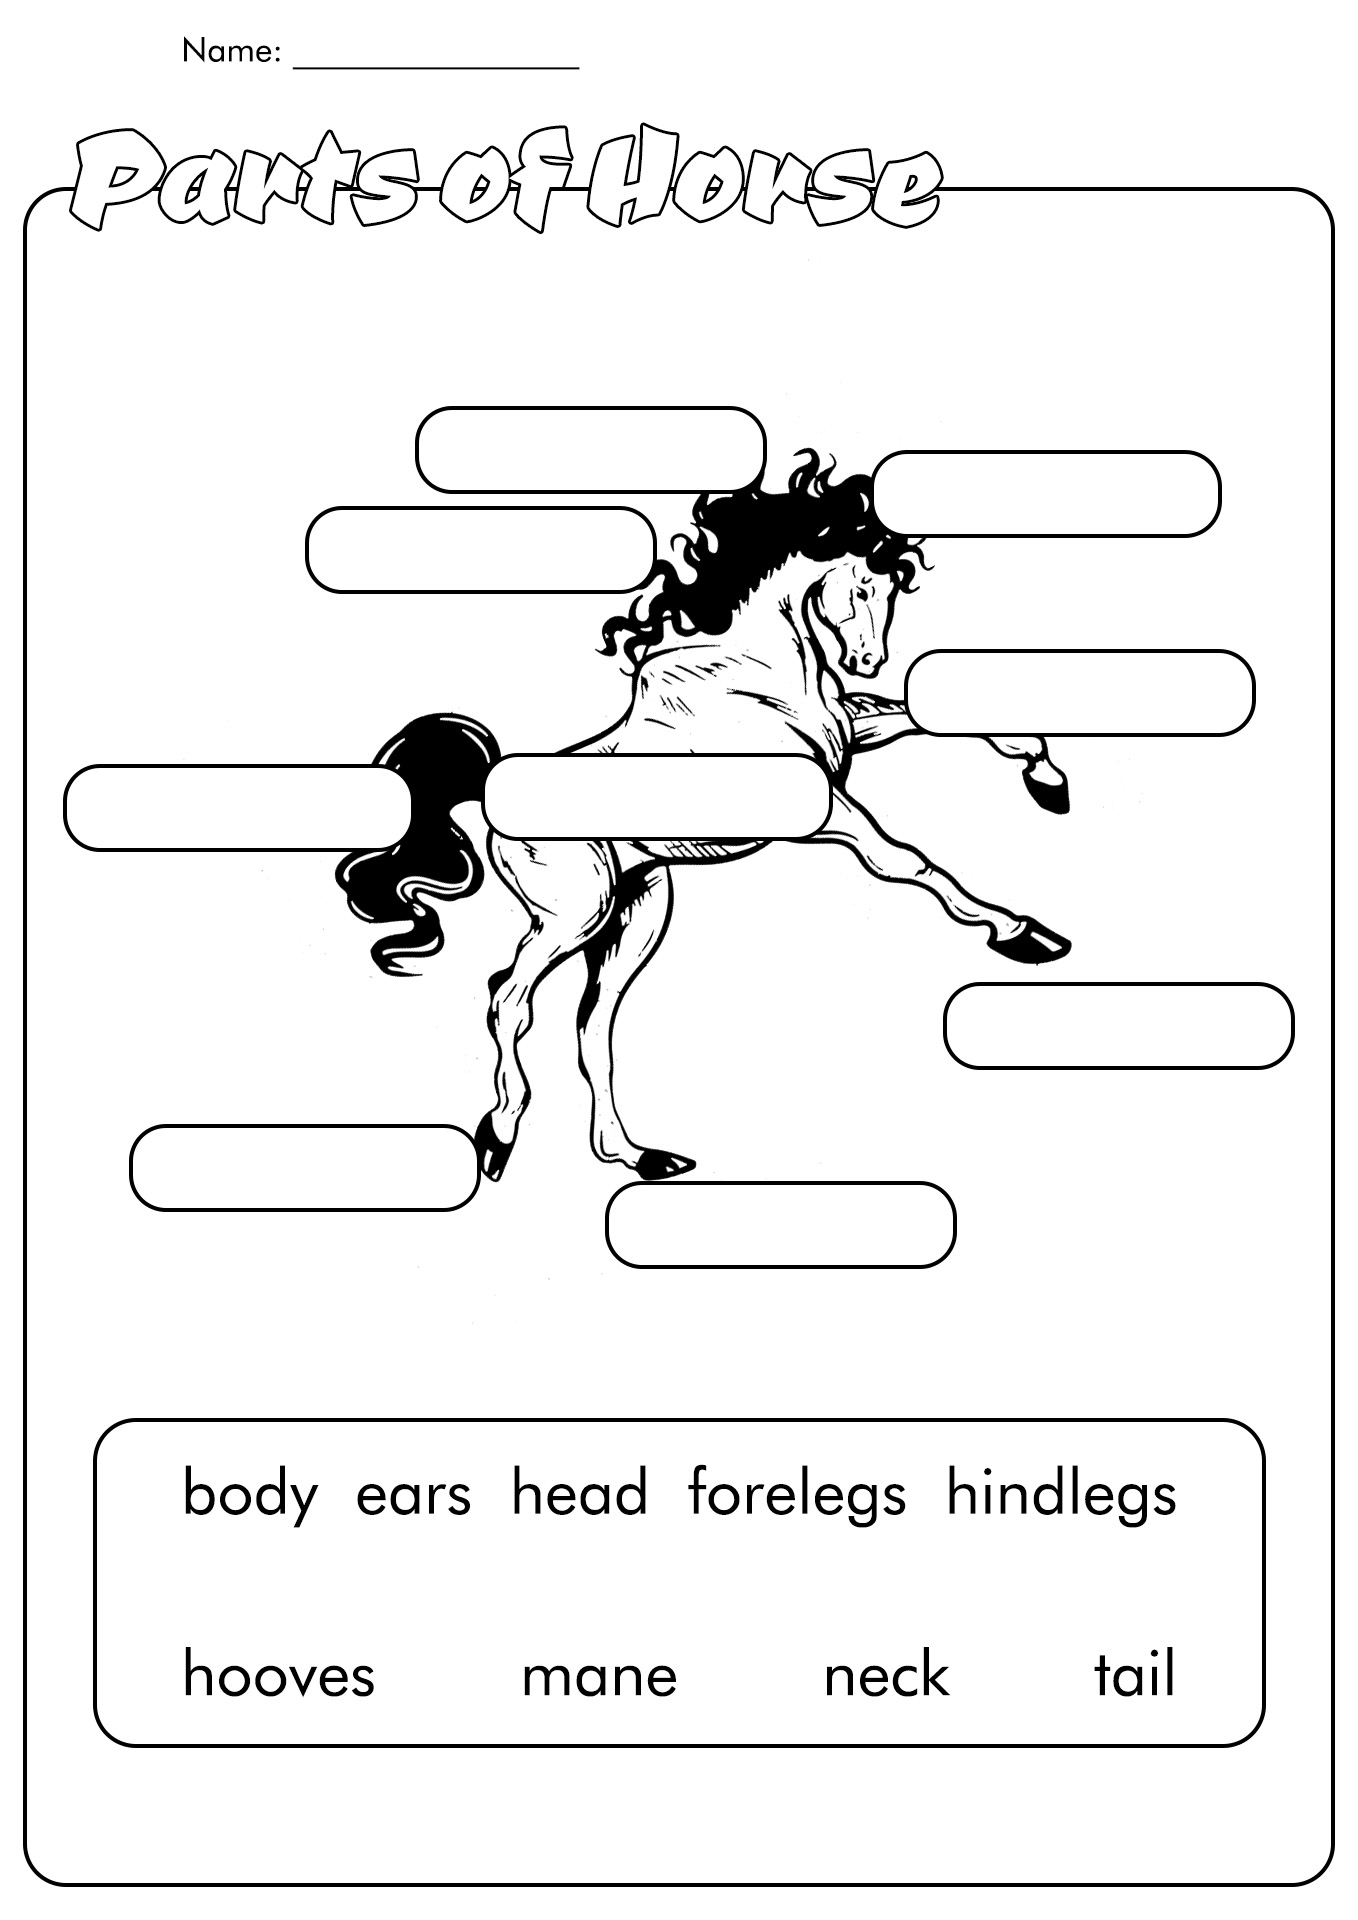 ec-lesson-plan-for-kids-2-markings-of-the-horse-equine-chronicle